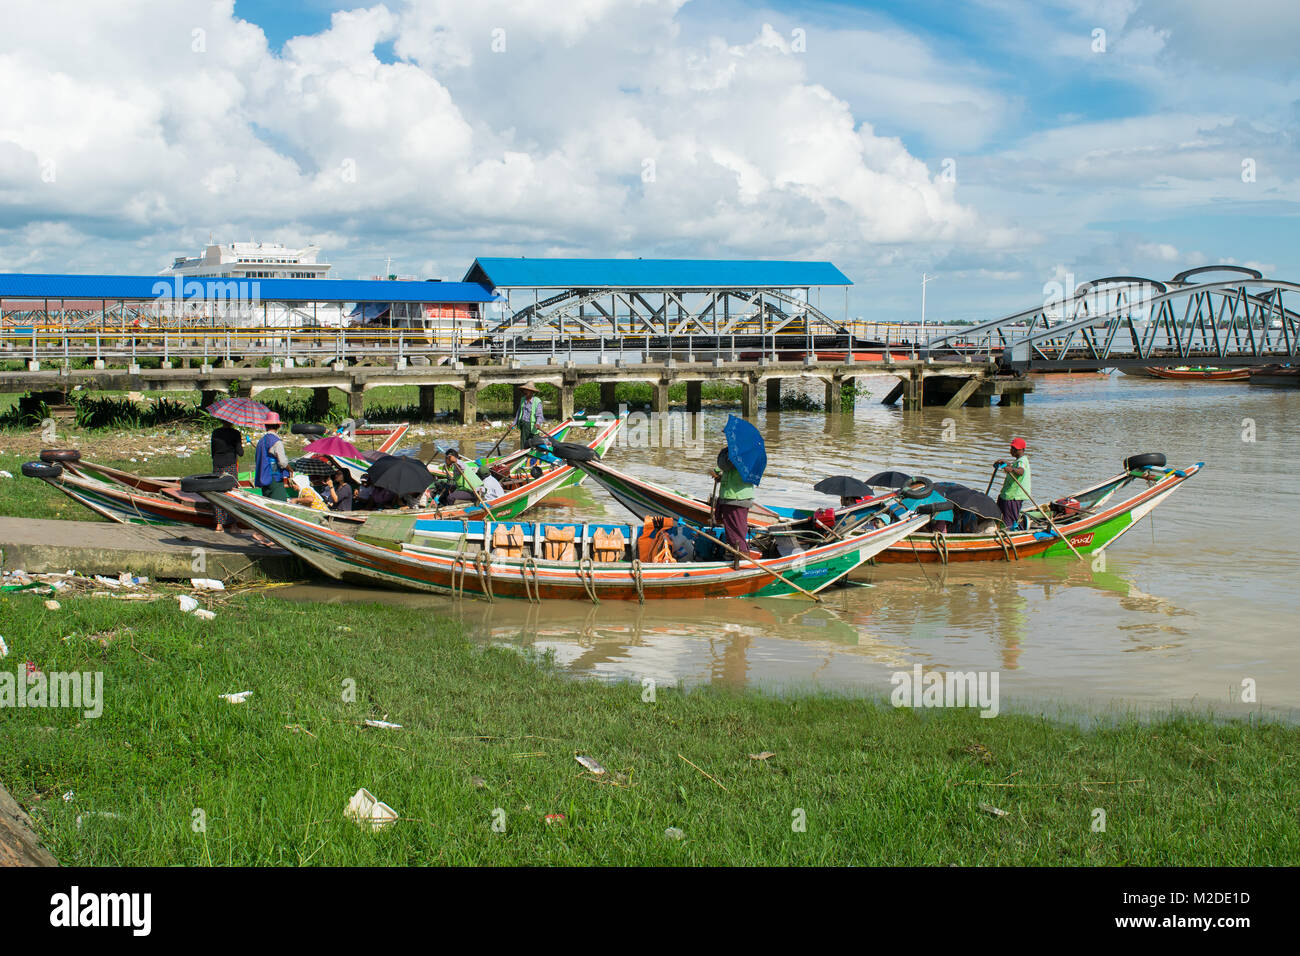 A boat arriving at Botahtaung jetty, carrying Burmese passengers on the Yangon River. brown river water, colorful boats, clean water transport, Burma Stock Photo